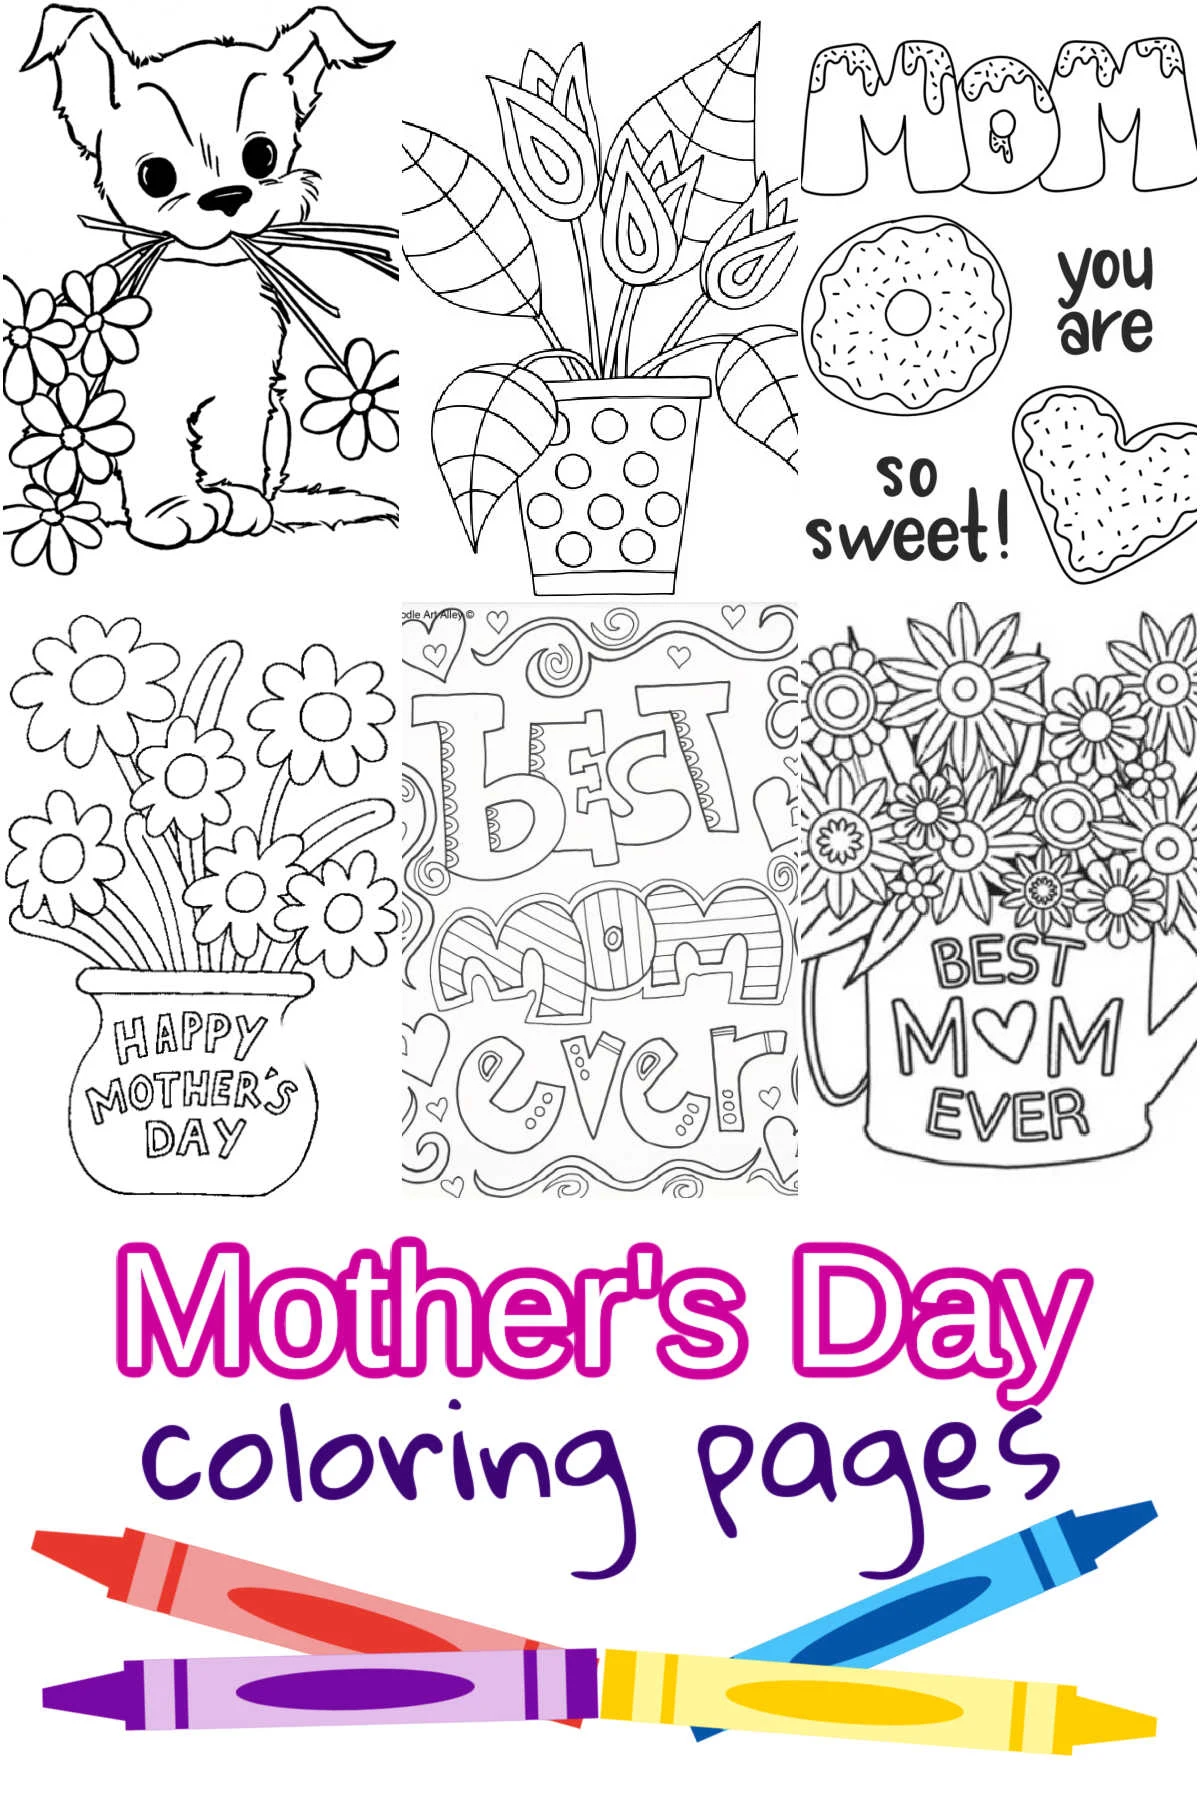 Collage of Mother's Day Coloring Pages